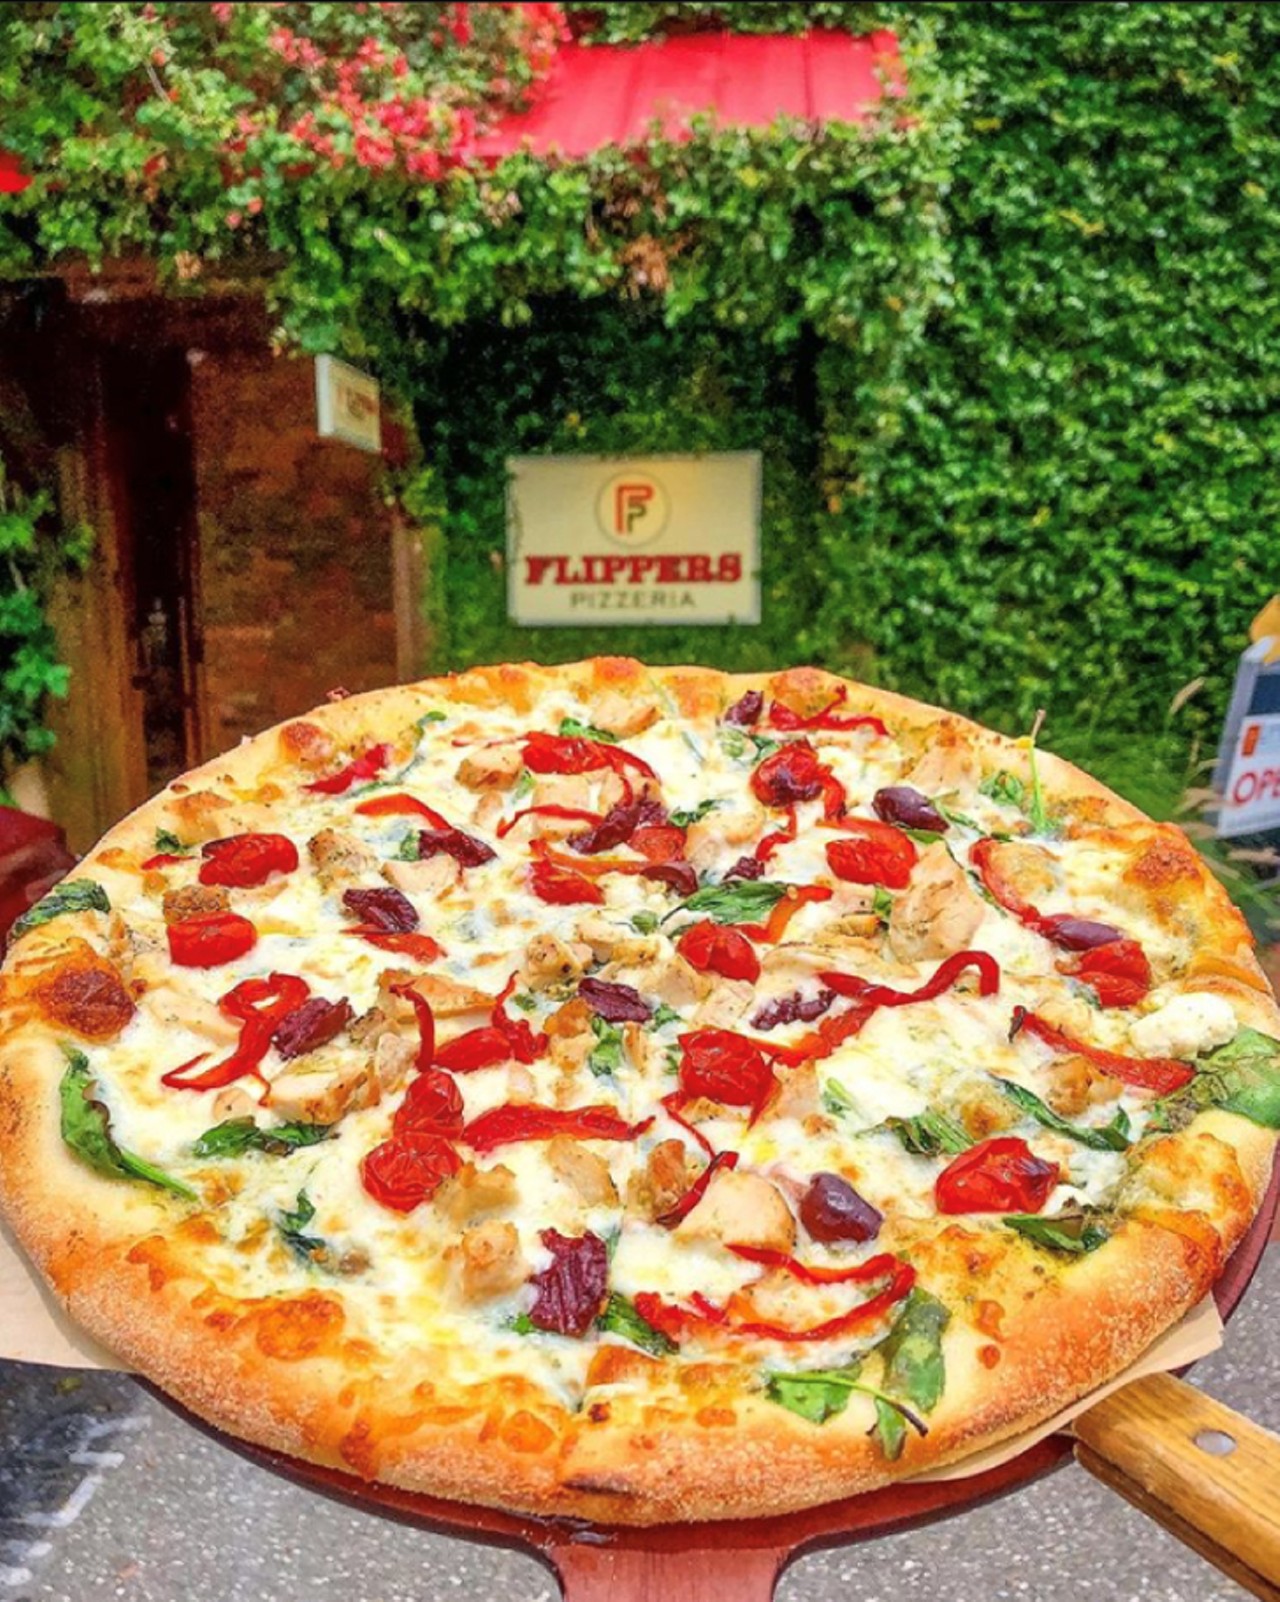 Flippers Pizzeria
1054 4th St. N., St Petersburg
(727) 822-9860
flipperspizzeria.com  
$10 - MyPie Mediterranean Chicken Pizza: 11" Signature MyPie featuring organic spinach, basil pesto sauce, roasted red peppers & Grape tomatoes, Kalamata olives, aged mozzarella, & feta cheese. Add on a $3 Peroni!
Takeout (call-in), Online ordering (pickup), Curbside pickup, Dine-in, Delivery